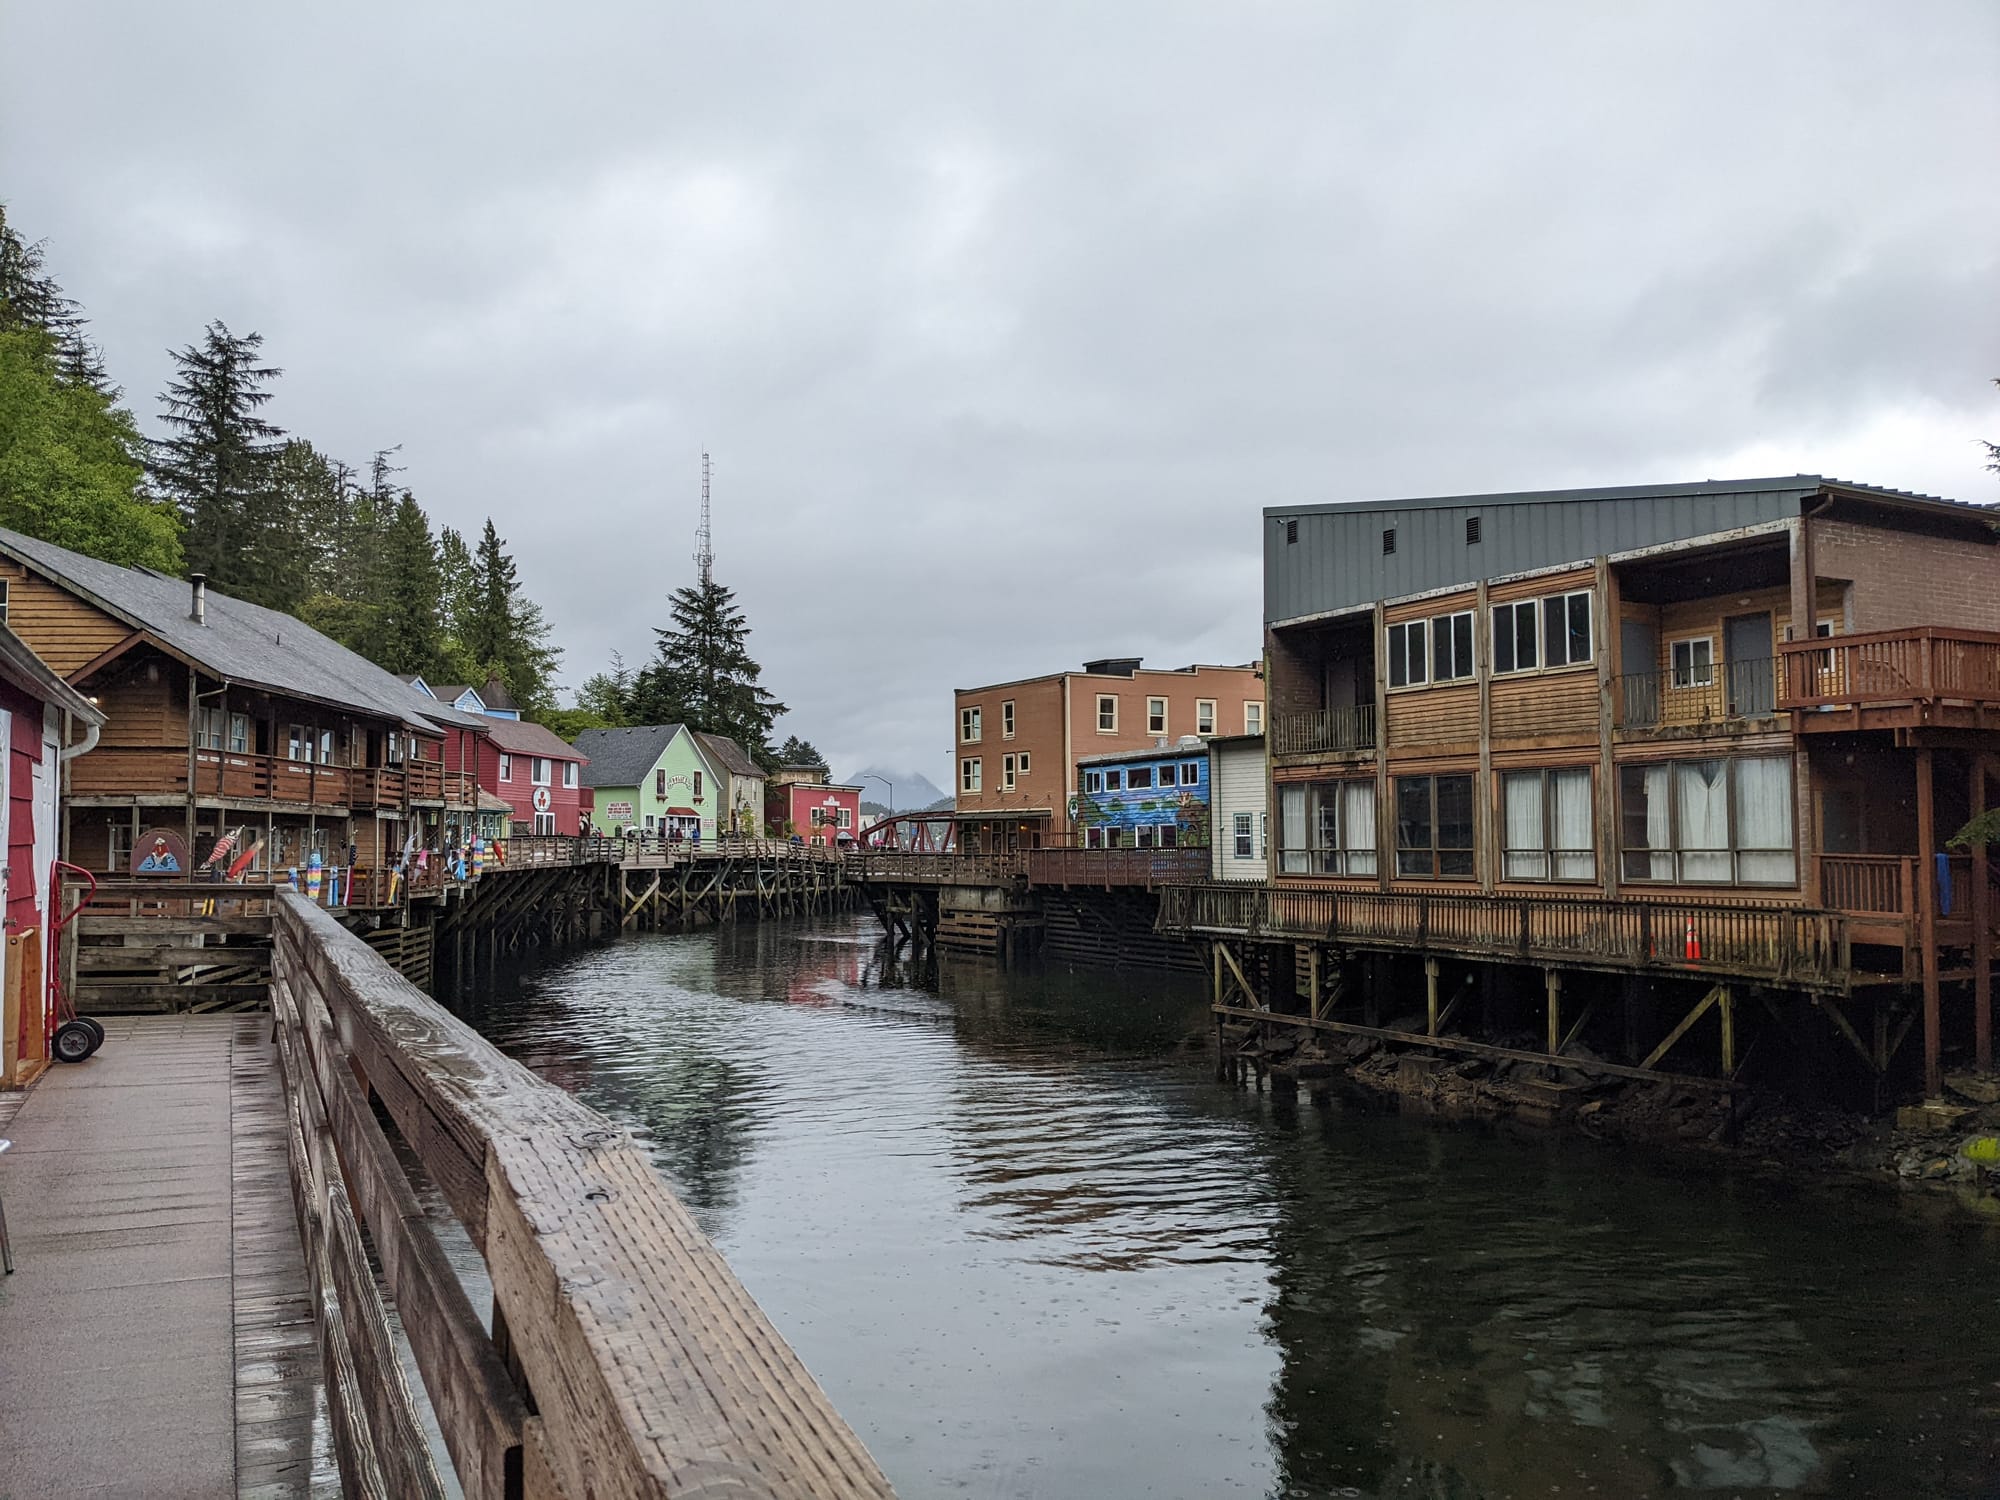 City Guides: Things to do While Boating in Ketchikan, Alaska